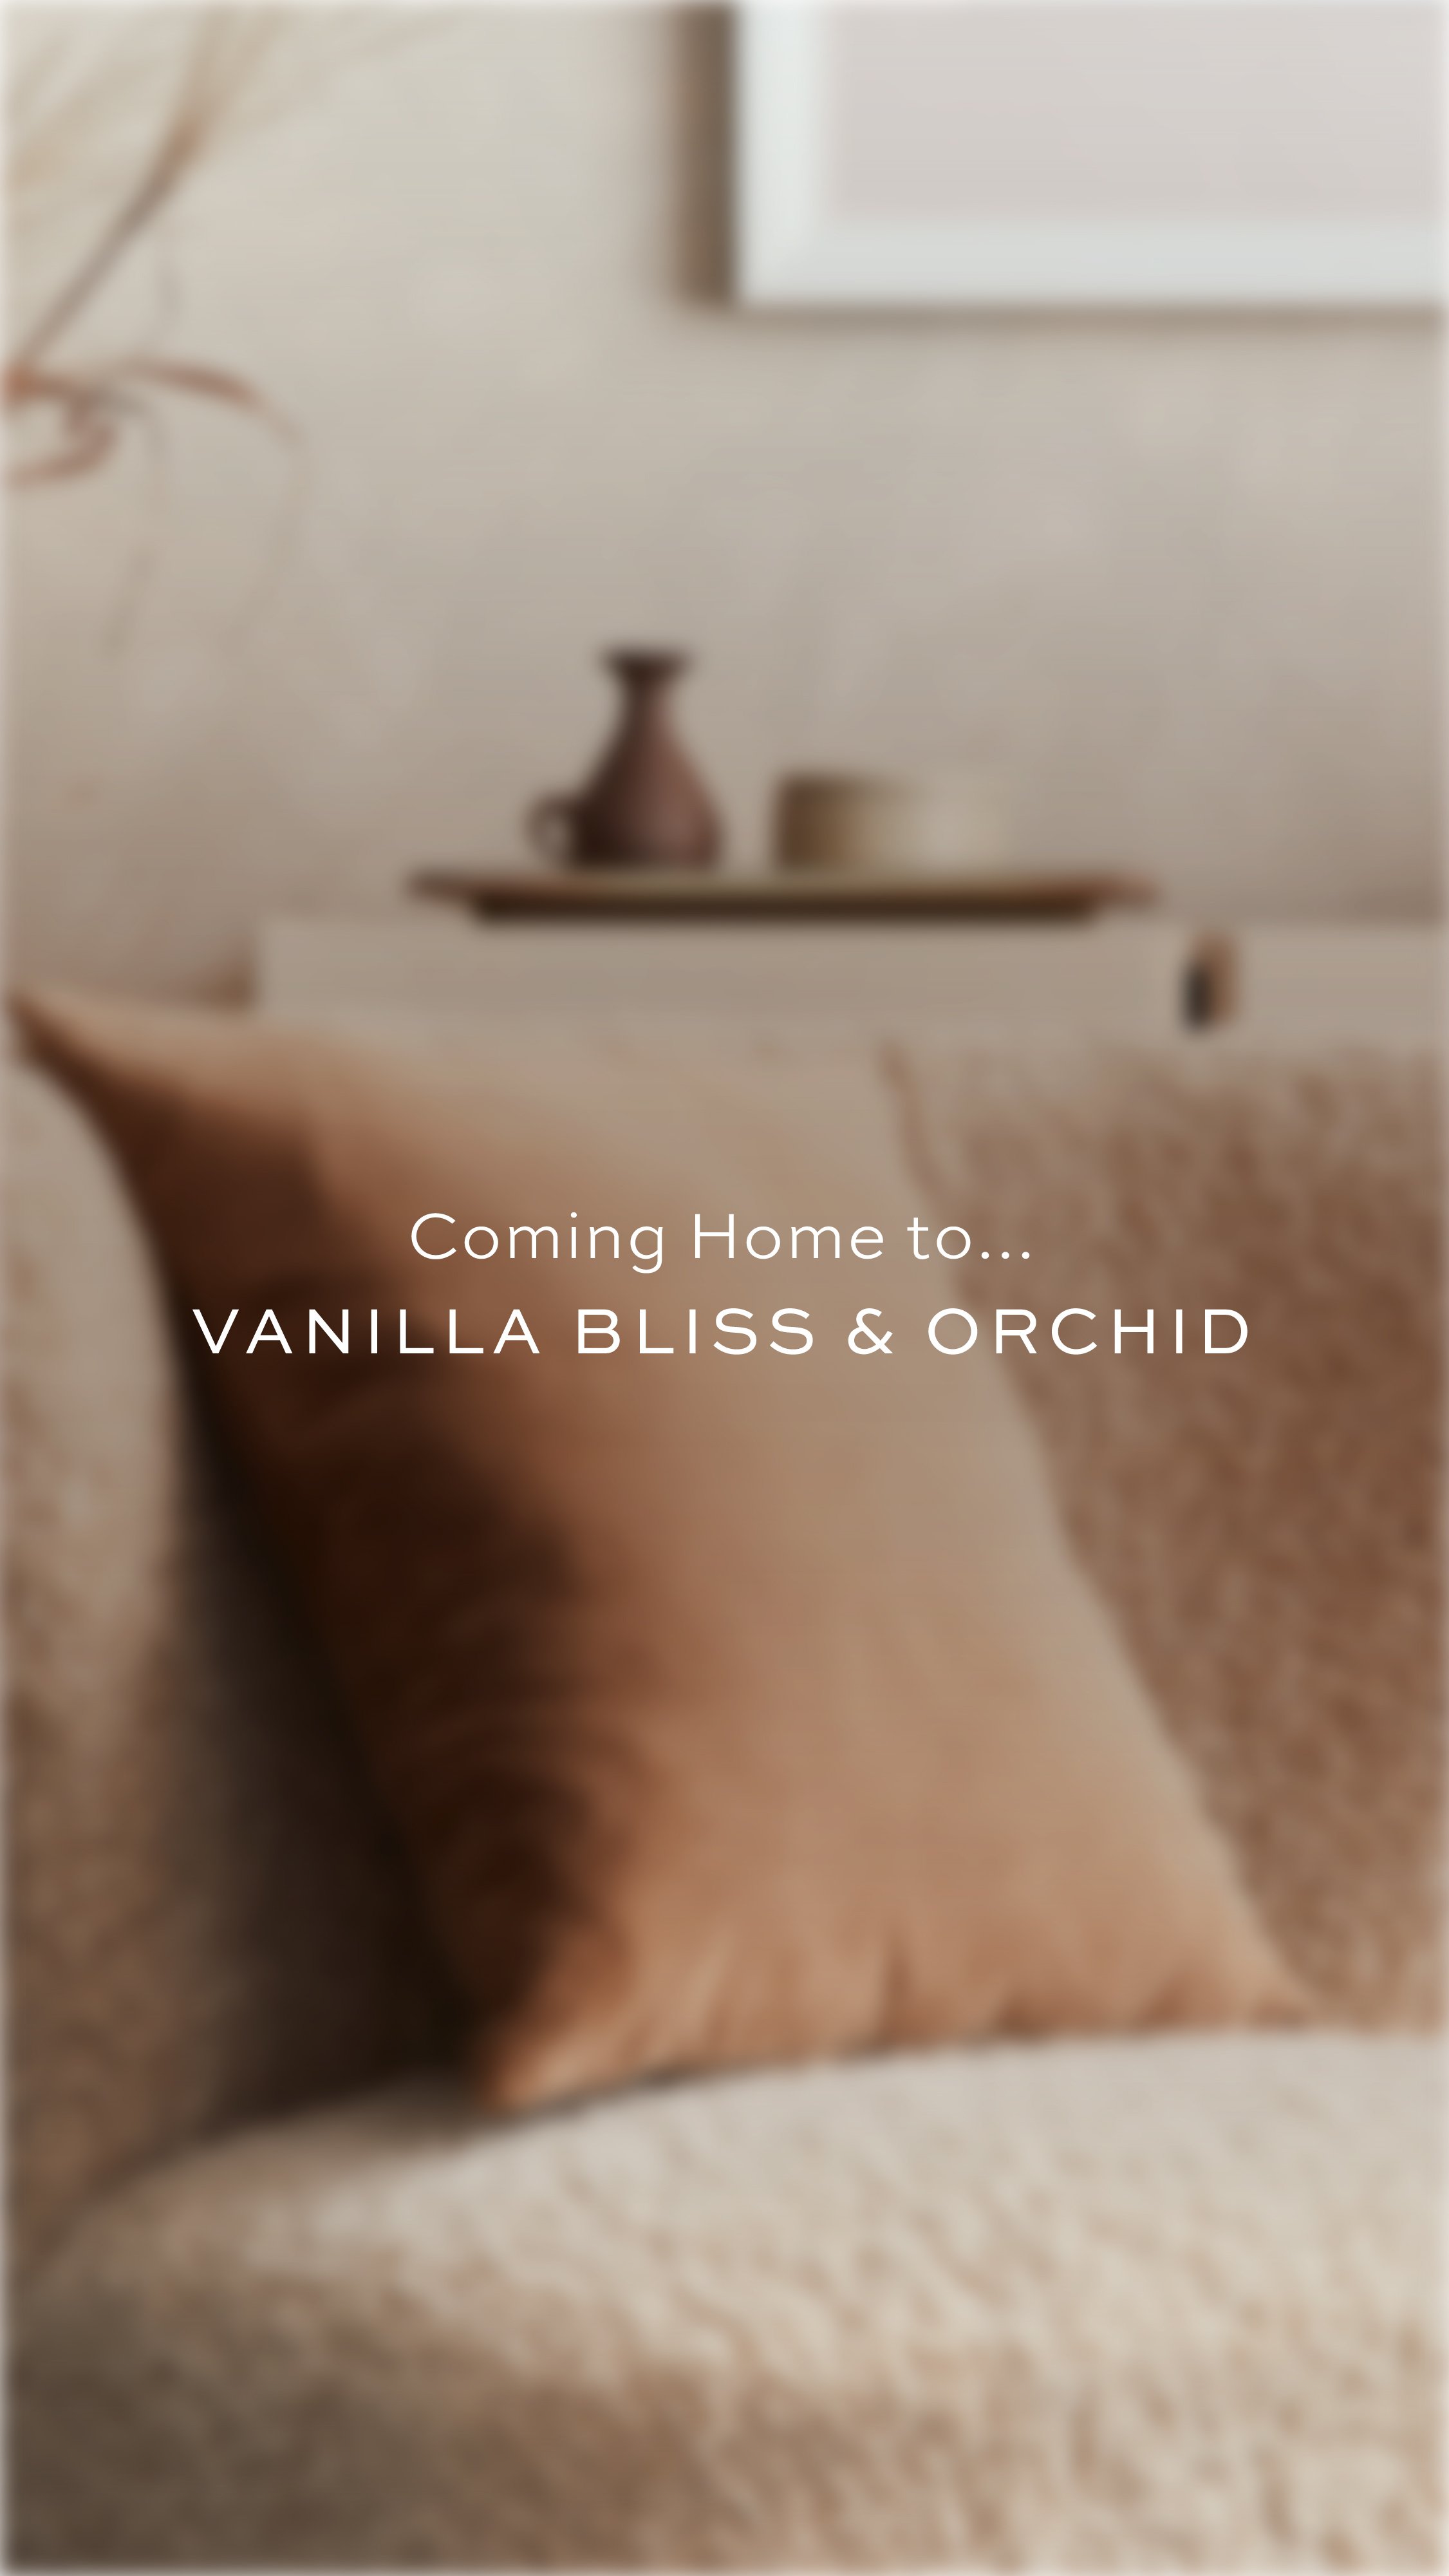 2023_DG_KP_Launch_Vanilla-Bliss and Orchid-Stories-01.jpg